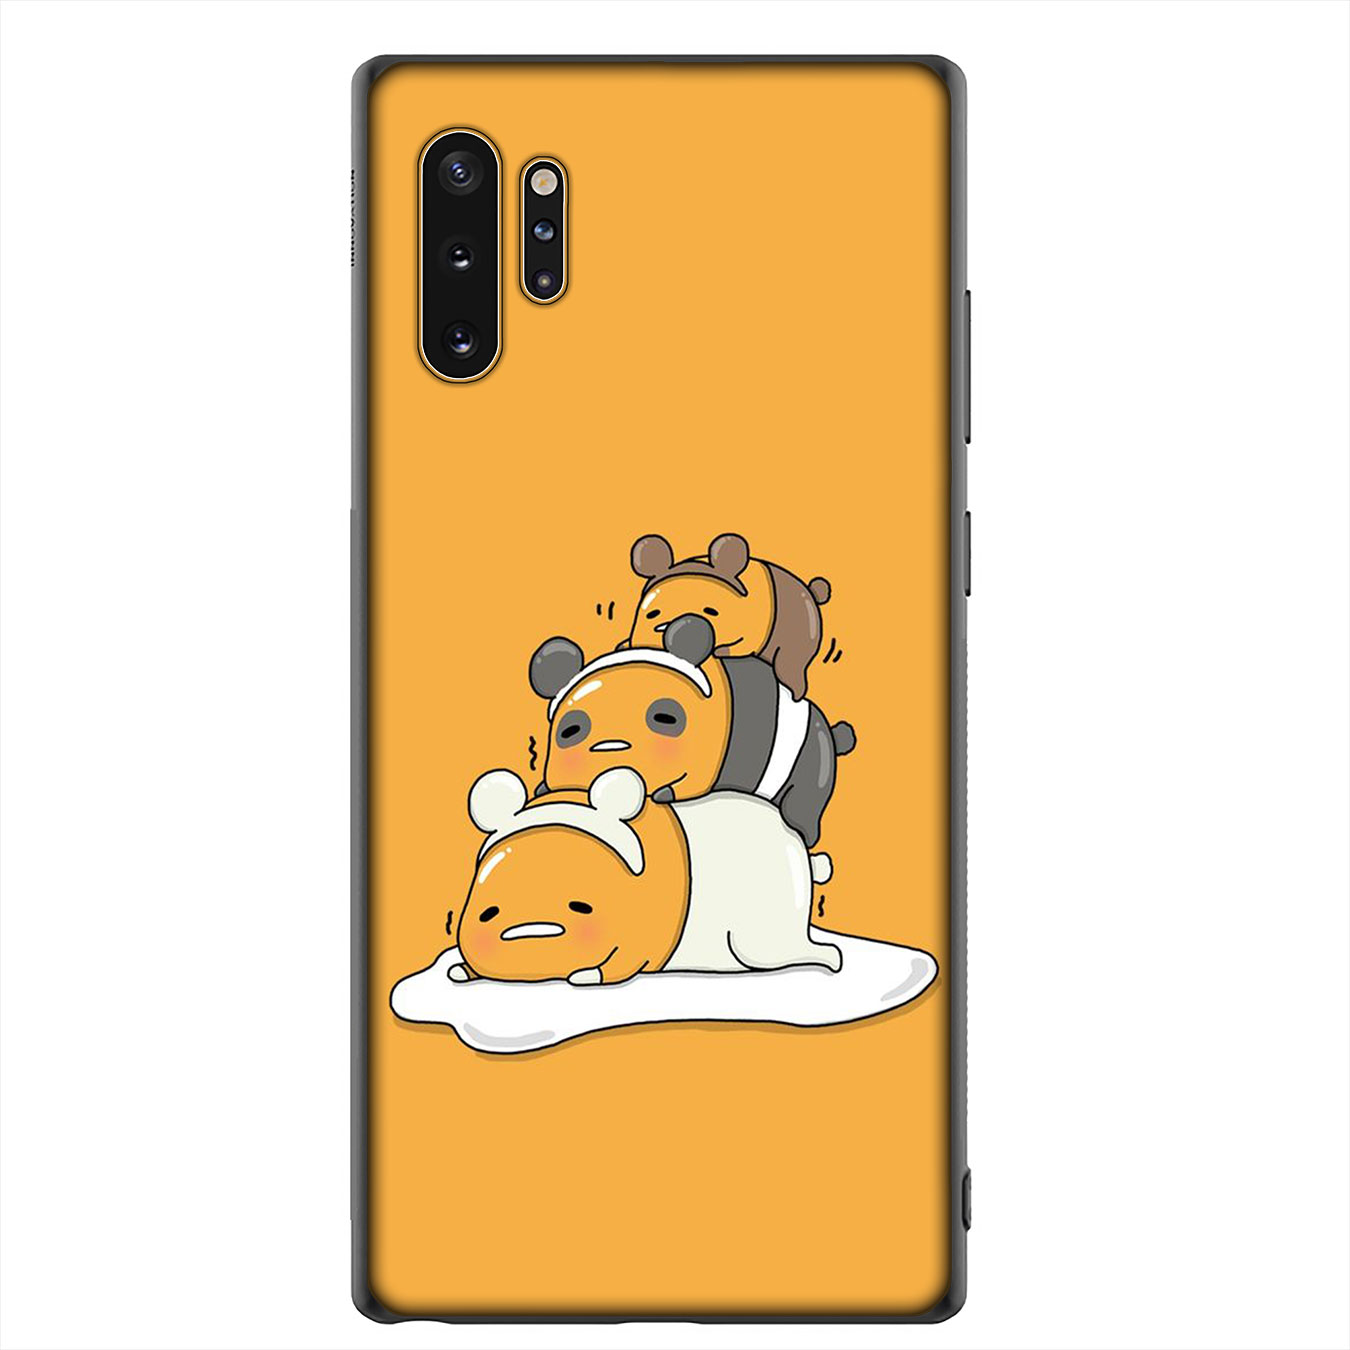 Samsung Galaxy Note 20 Ultra Note 10 Plus  Lite 8 9 S7 Edge M11 Phone Case Soft Silicone Casing Anime We Bare Bears